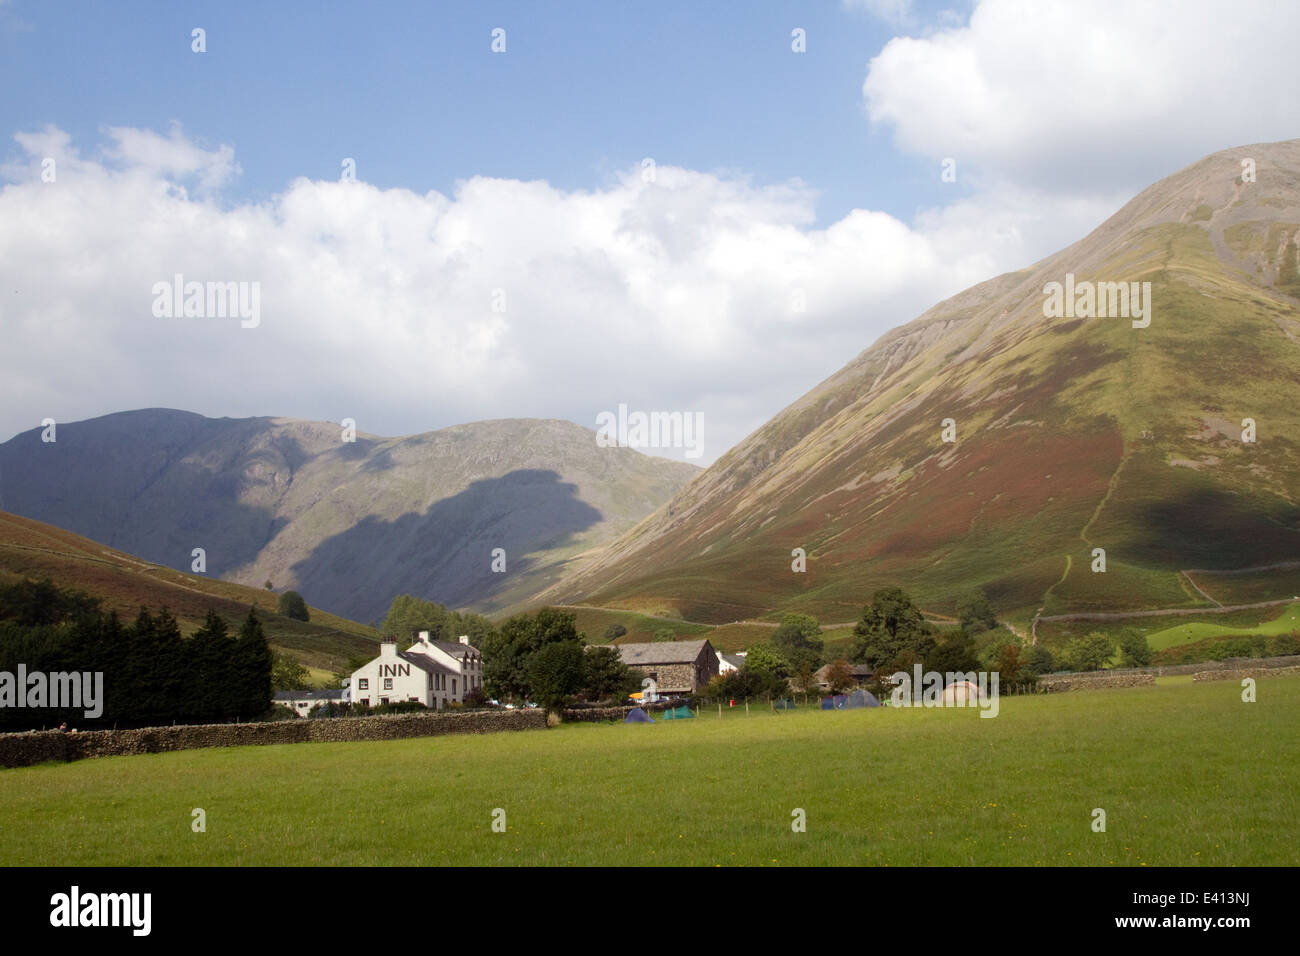 Wasdale Inn at Wasdale Head in the English Lake District Stock Photo